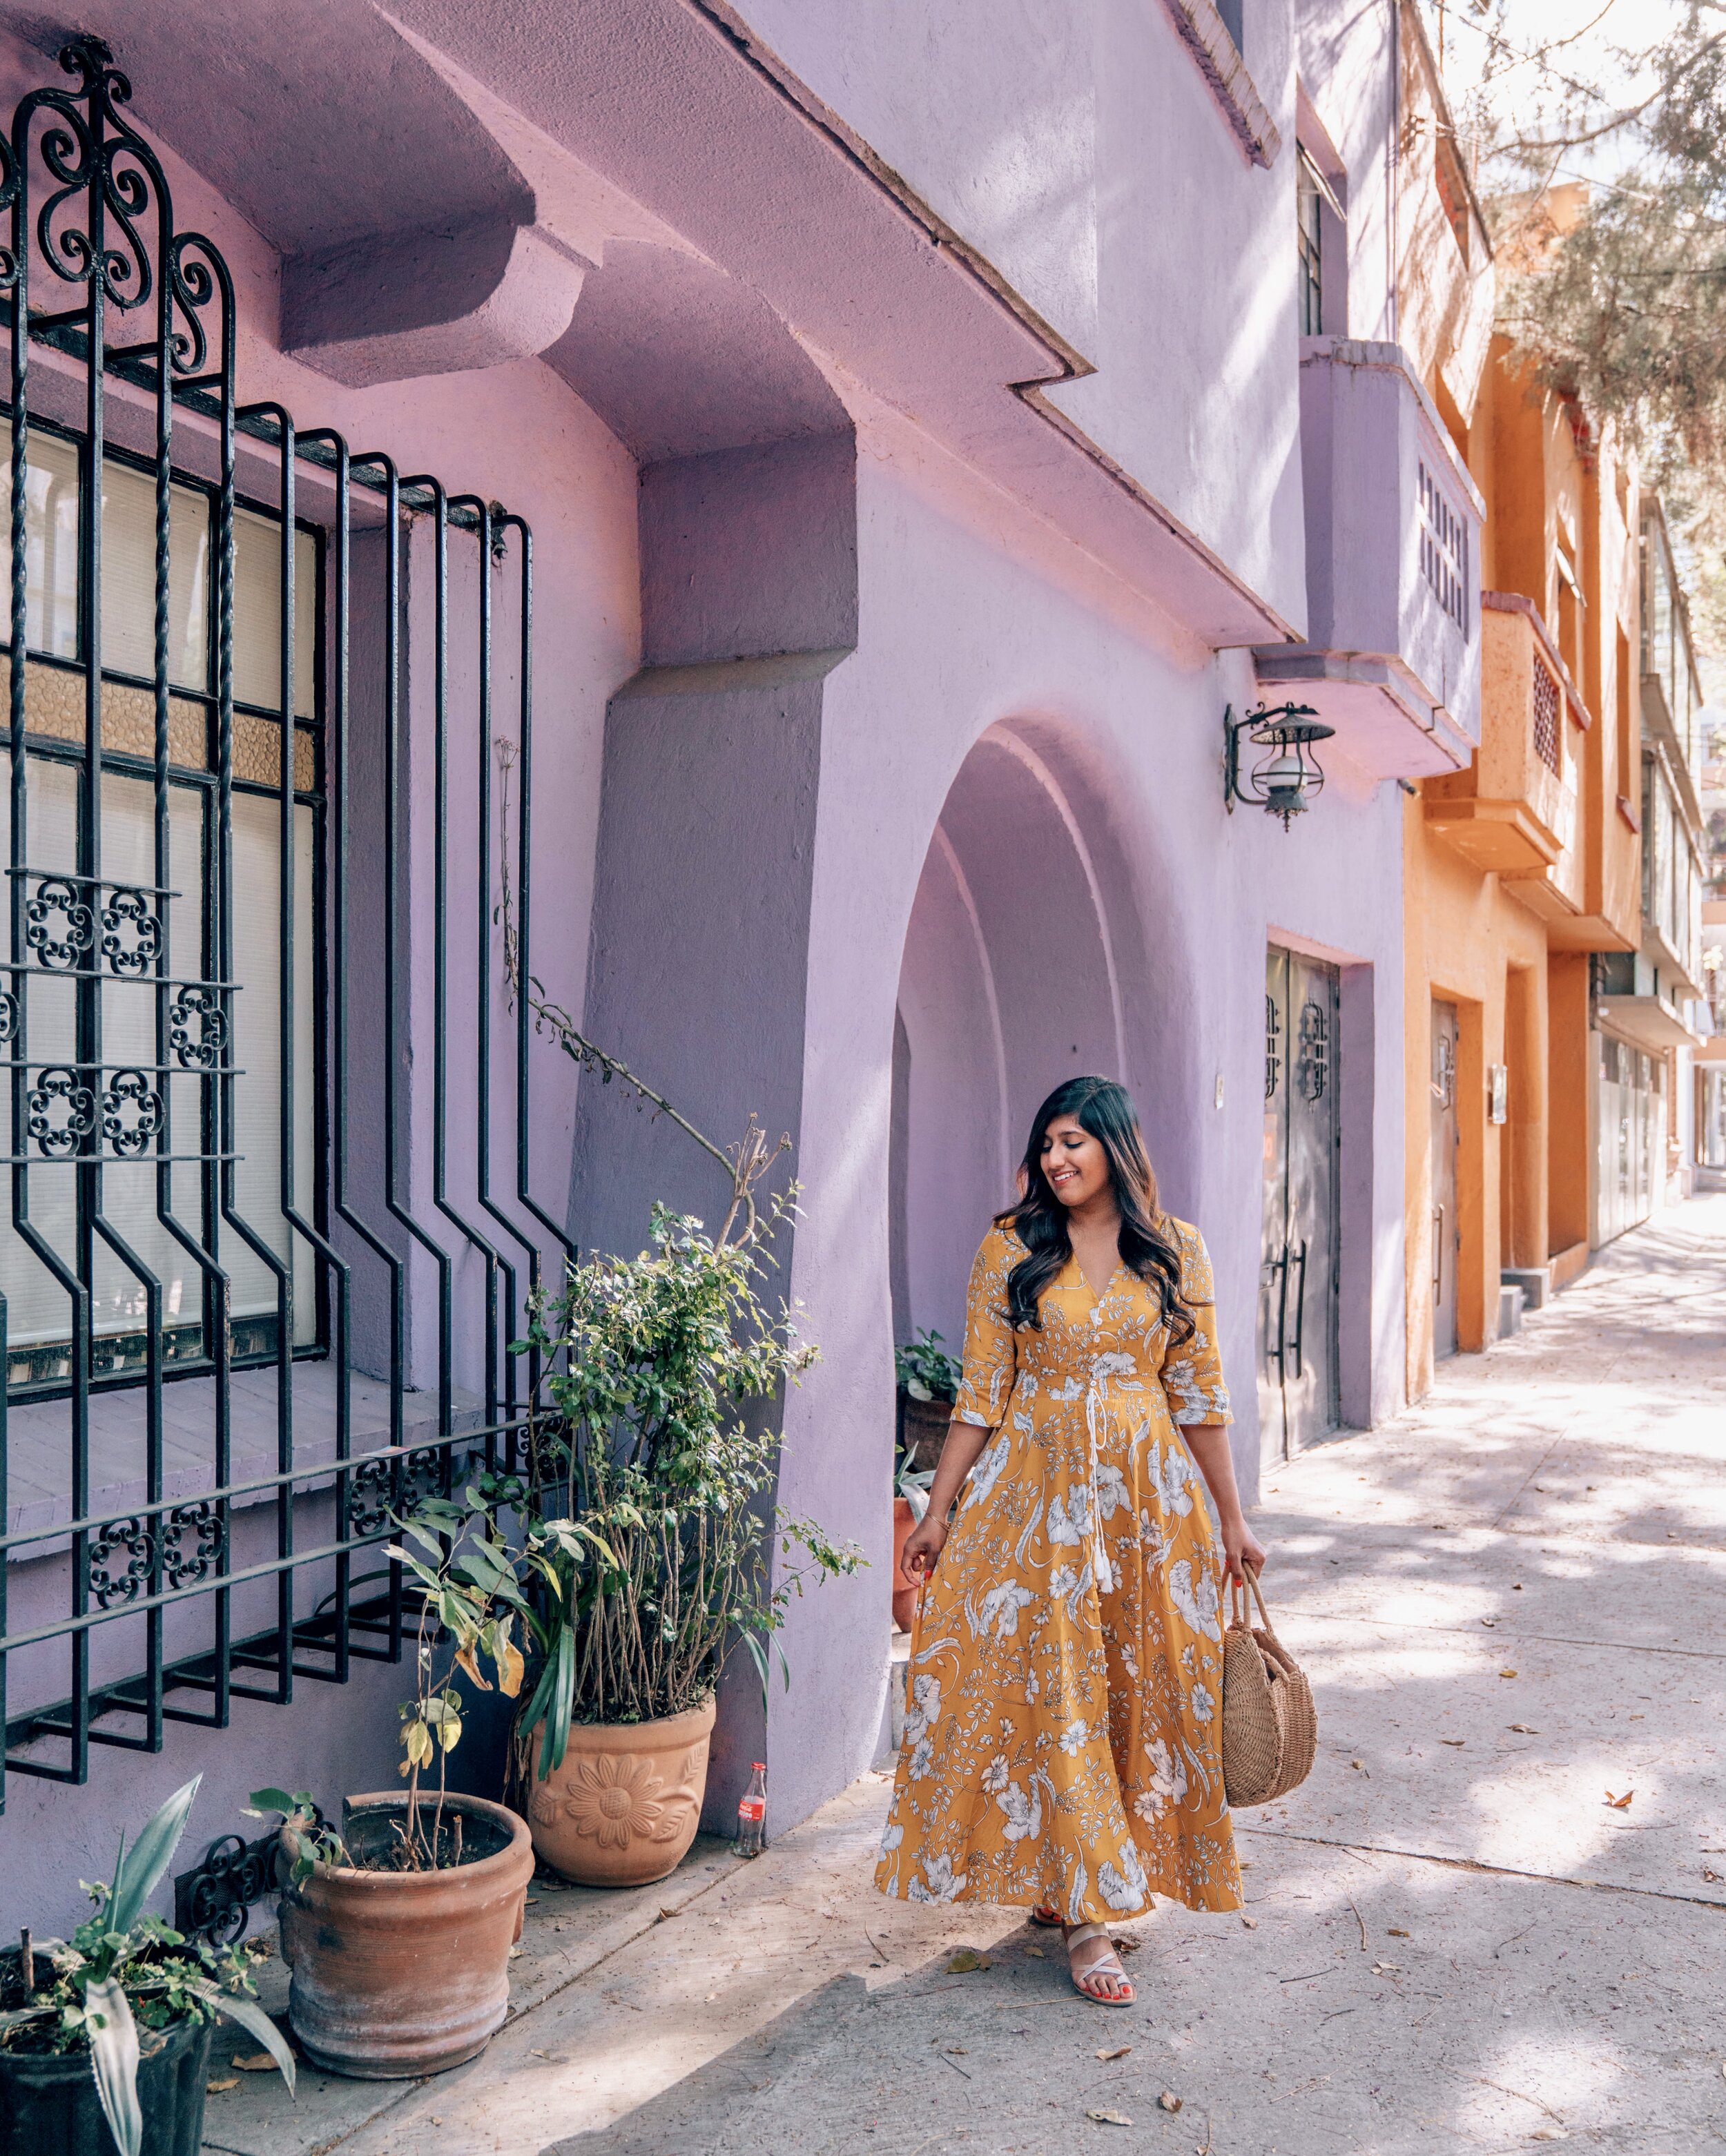 Mexico City Instagrammable Spots